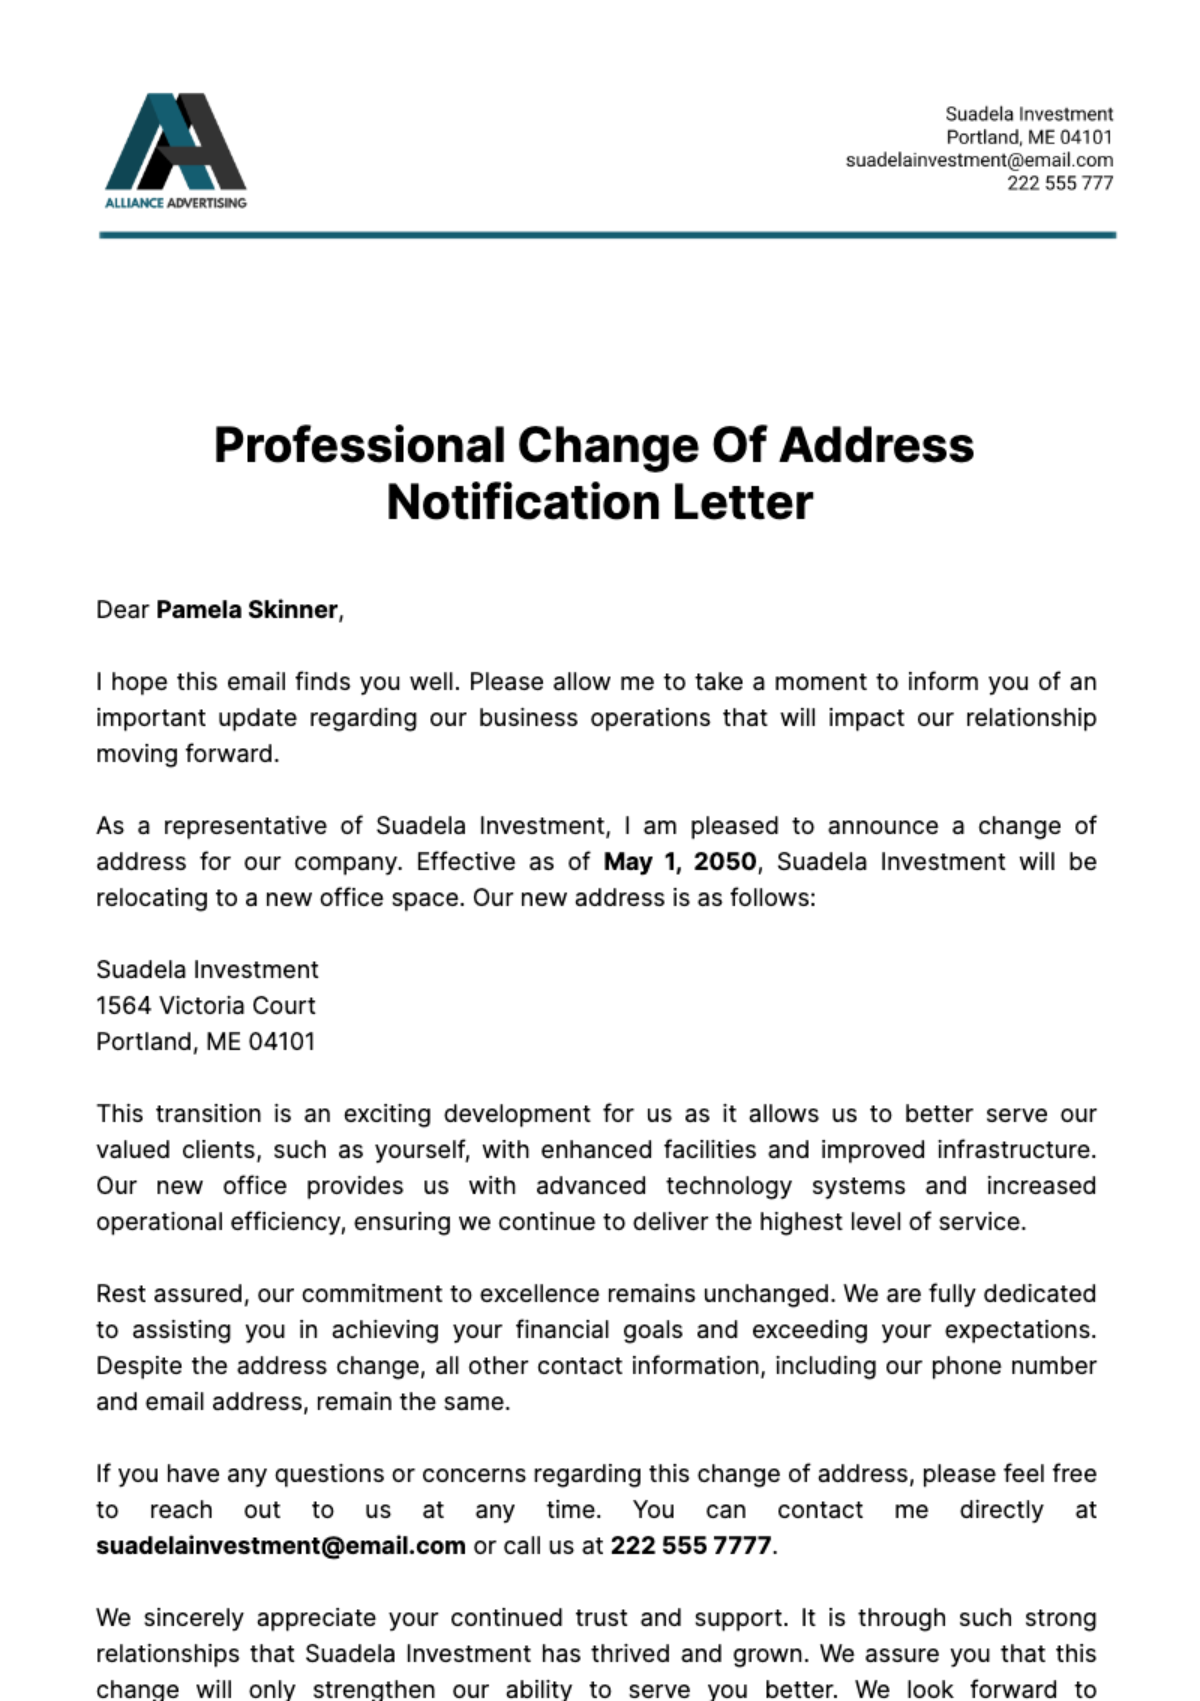 Free Professional Change of Address Notification Letter Template